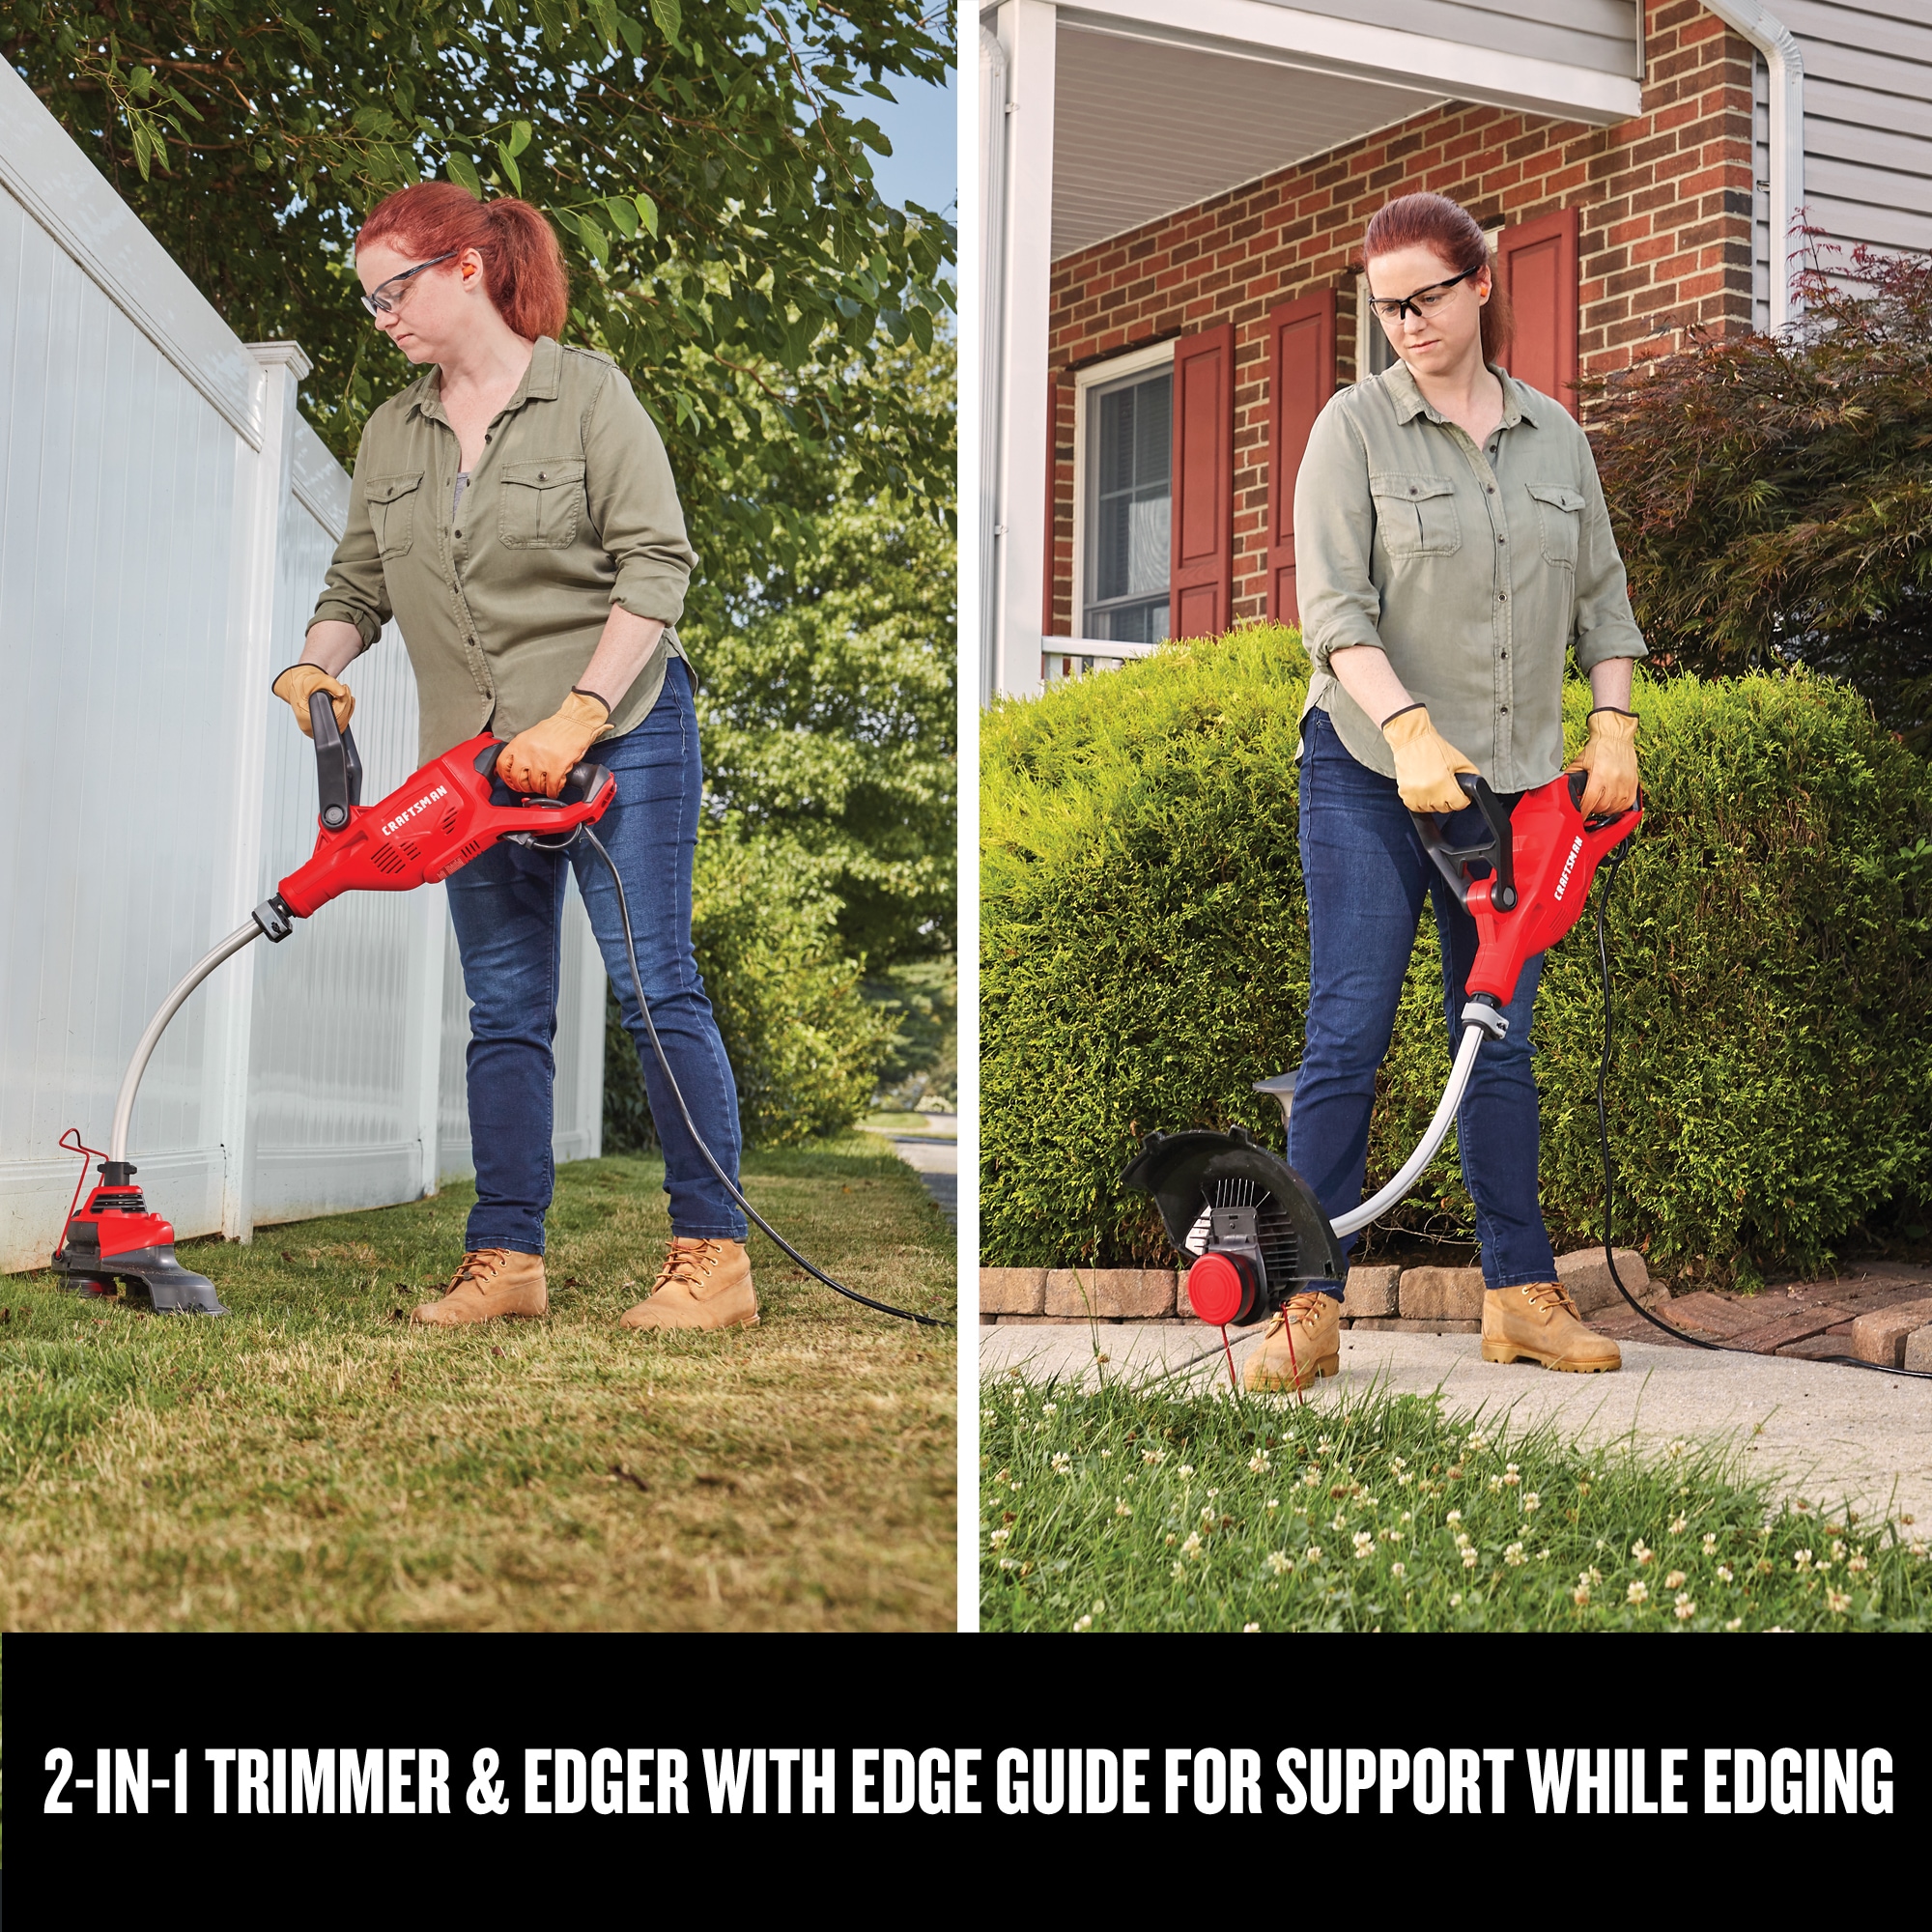 String Trimmer, Electric, 14-Inch